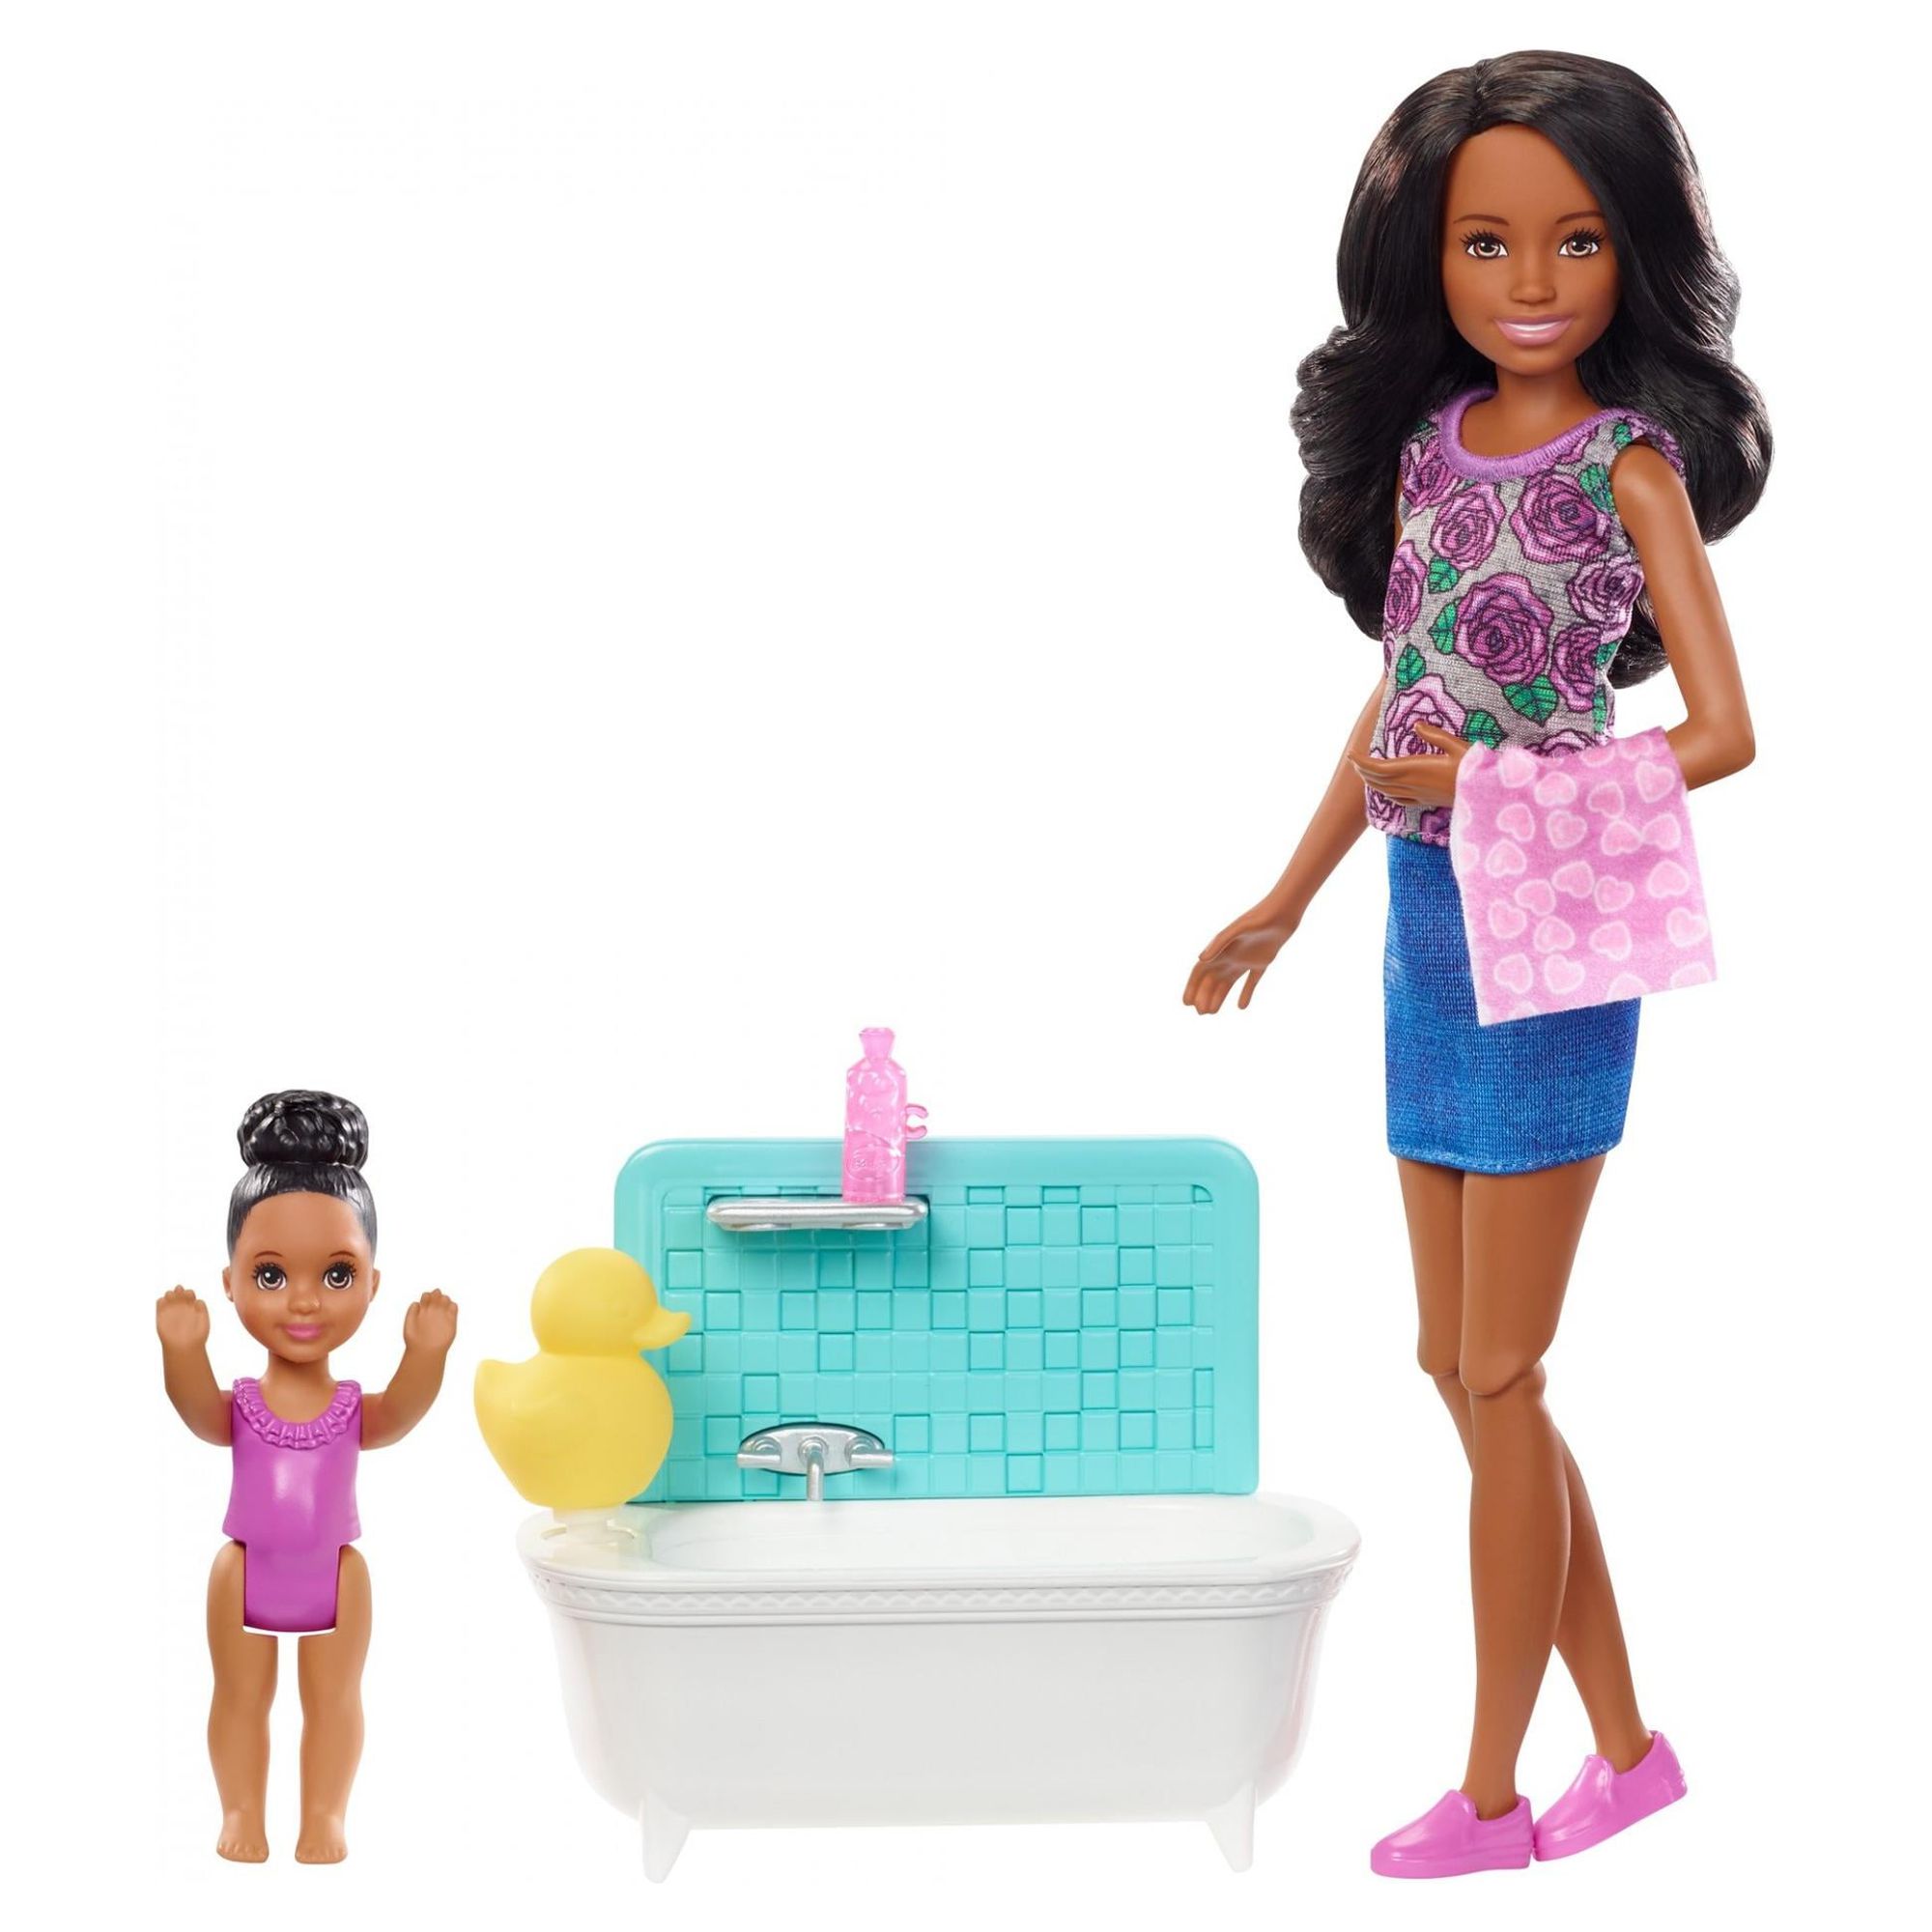 Barbie Skipper Babysitters Inc. Bath Time Playset with Toddler Doll - image 1 of 8